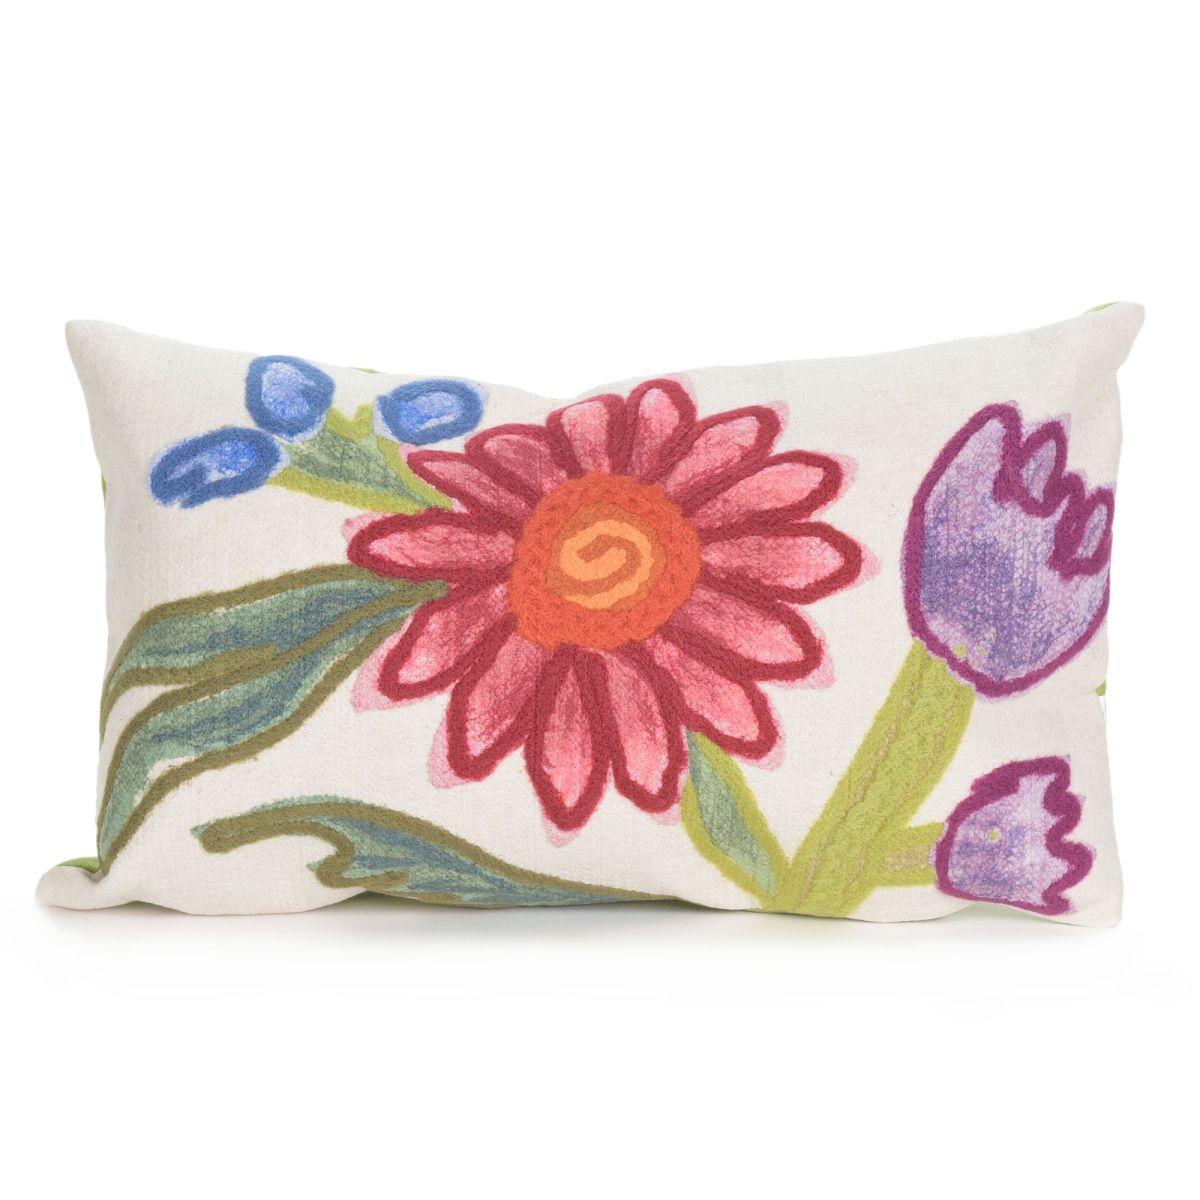 Trans-ocean Imports 7sc1s409344 12 X 20 In. Liora Manne Visions Iii Gypsy Flower Indoor & Outdoor Pillow - Multicolor